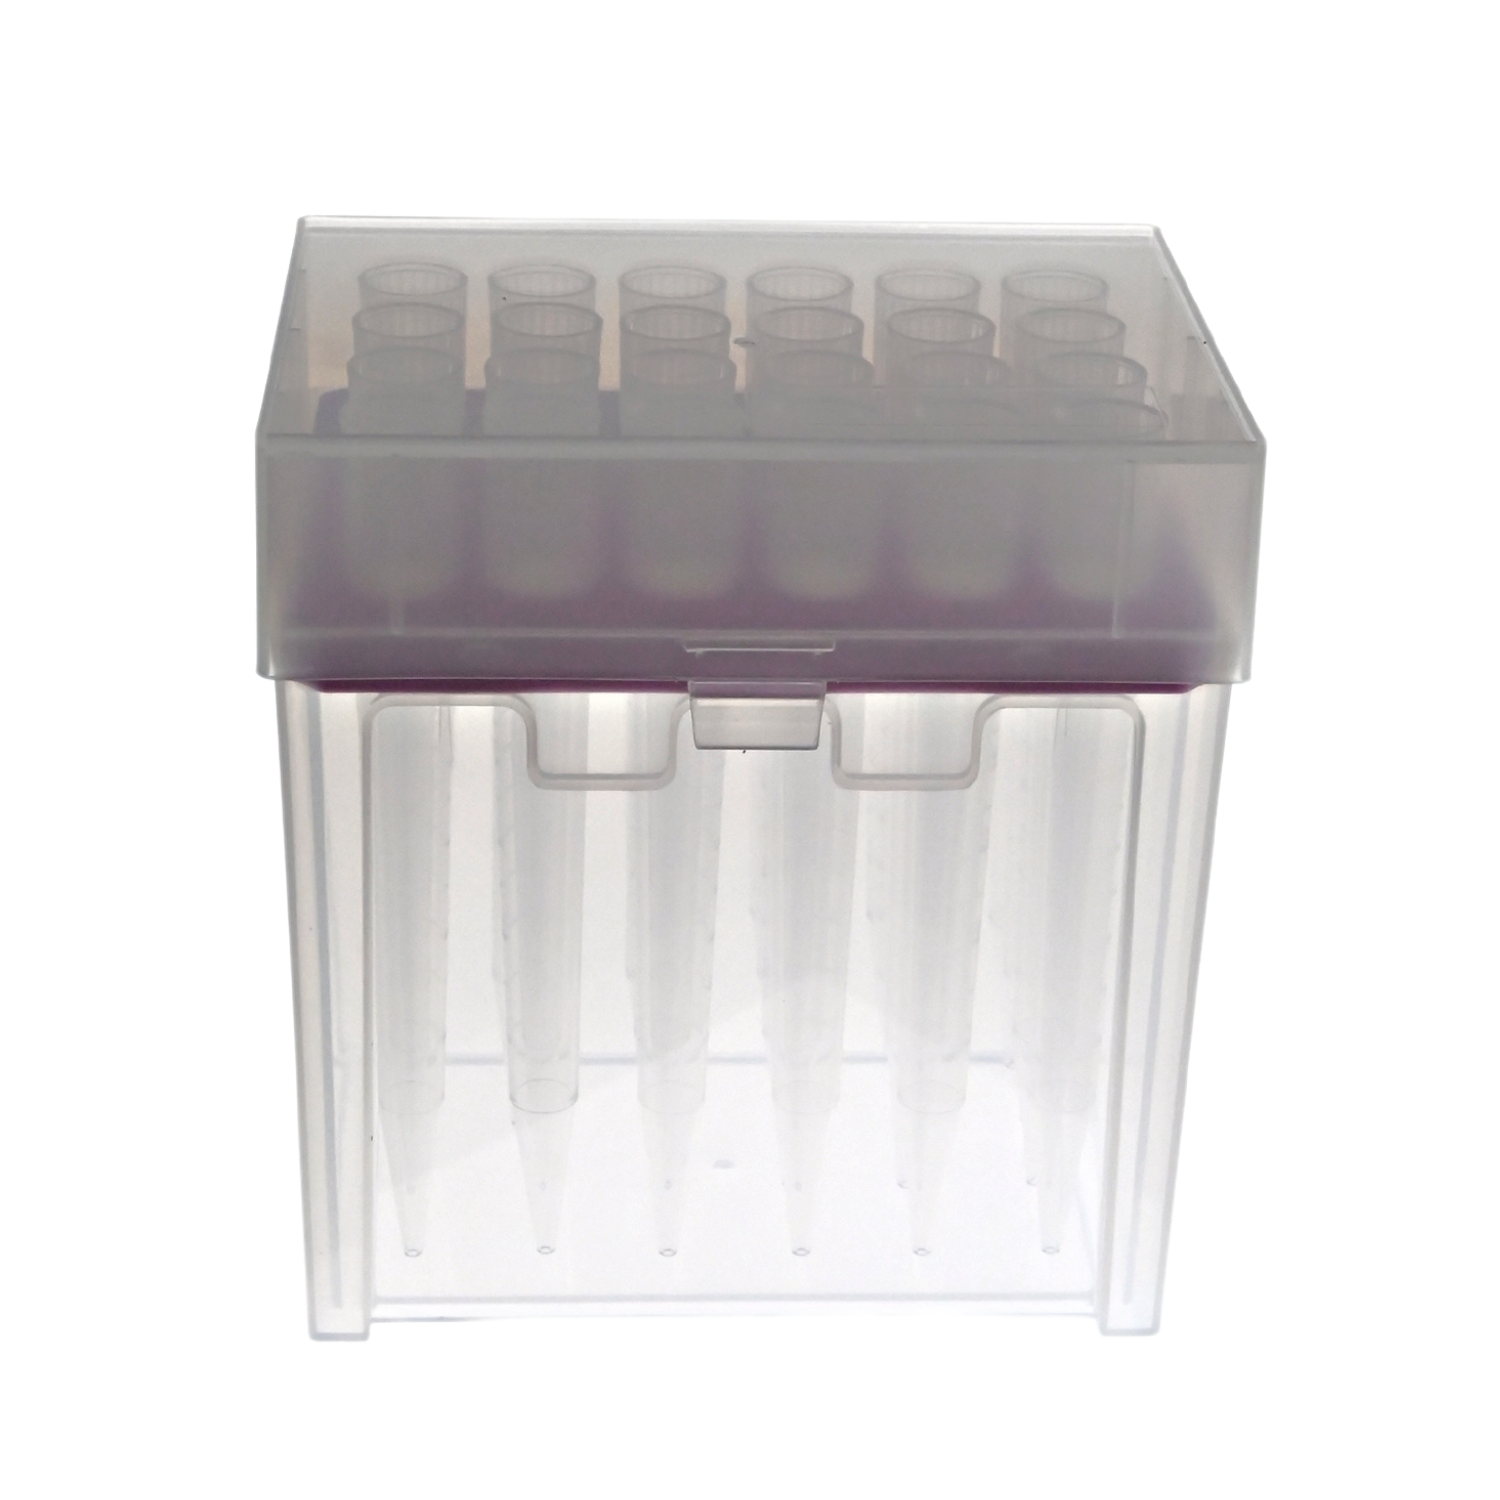 Reasonable price 1000ul Filter Pipette Tips - 5mL Universal Pipette tips – ACE